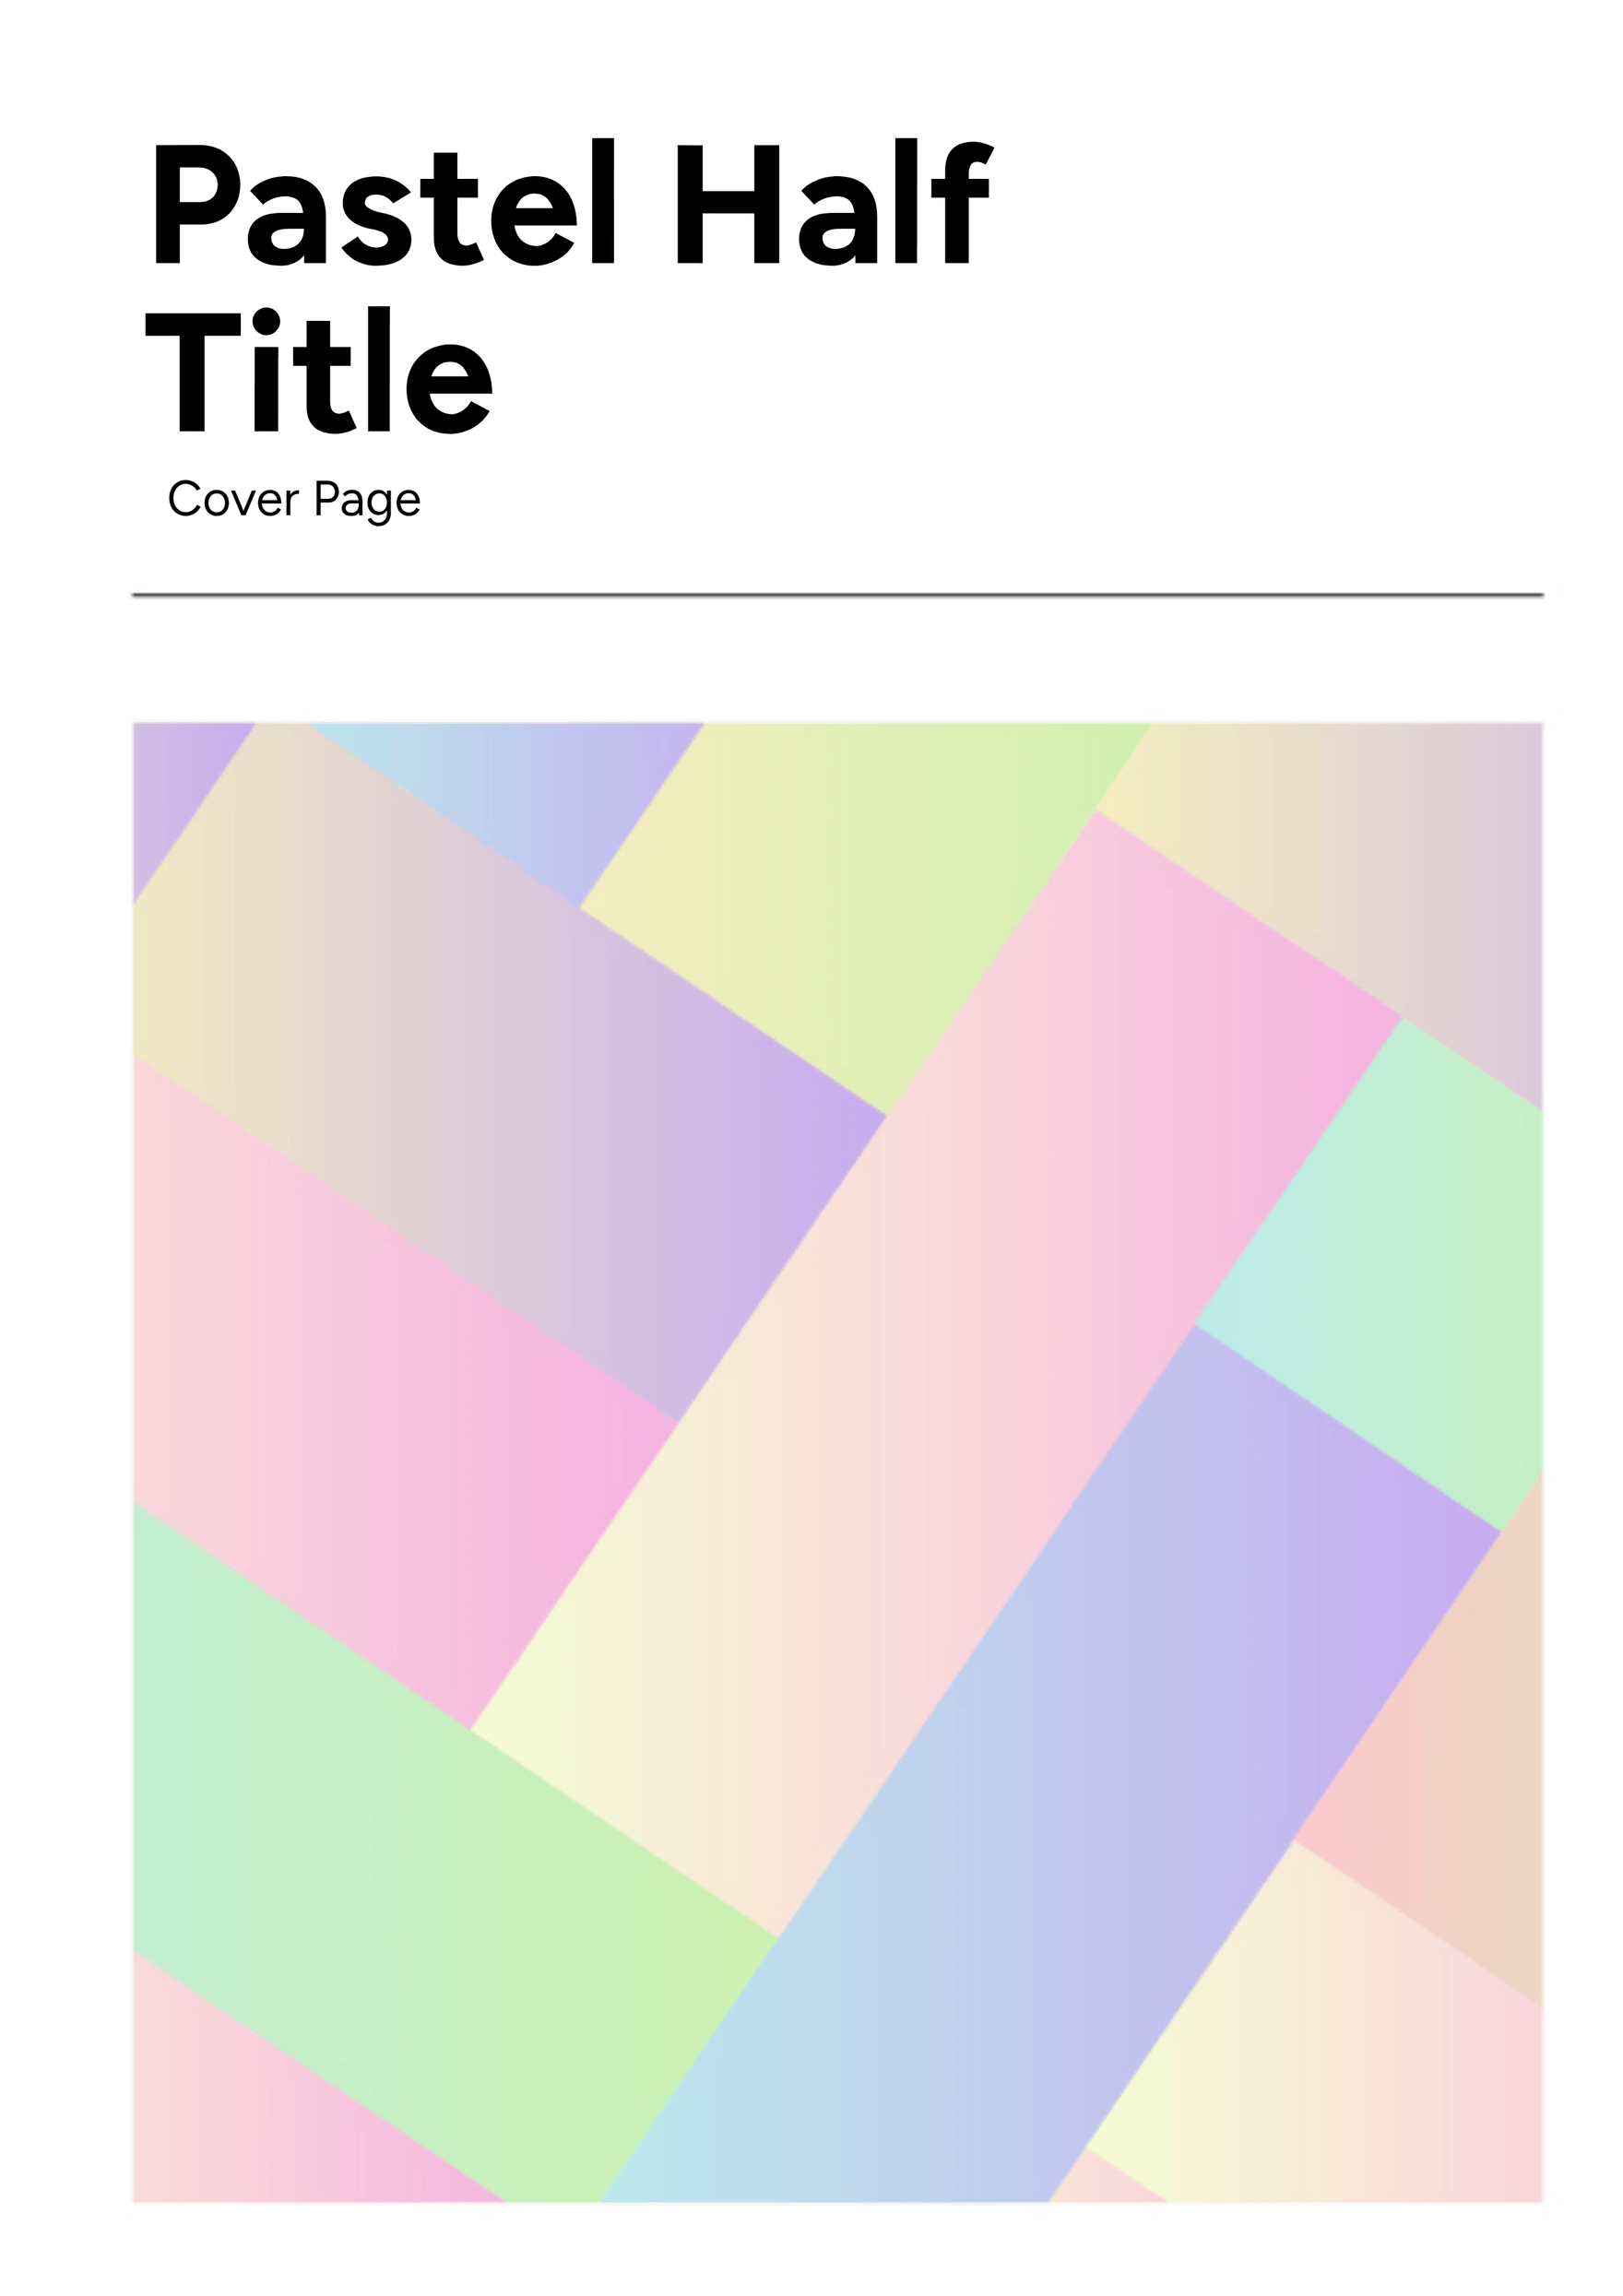 Free Pastel Half Title Cover Page Template